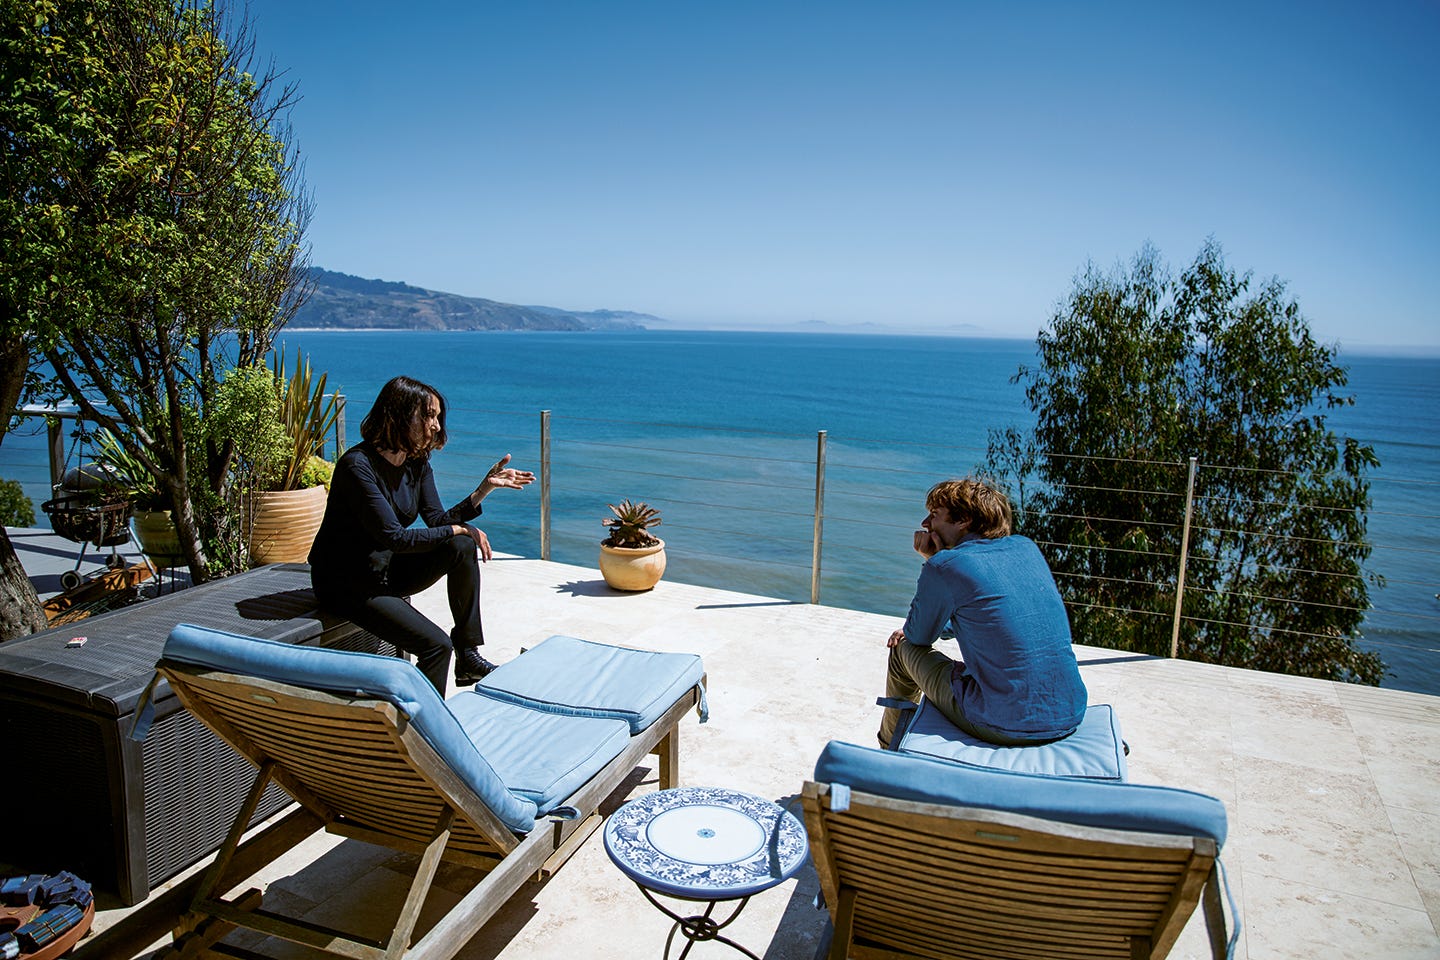 Suzanne Ciani and Spencer Tweedy sit on patio furniture on a concrete patio overlooking the Pacific ocean.